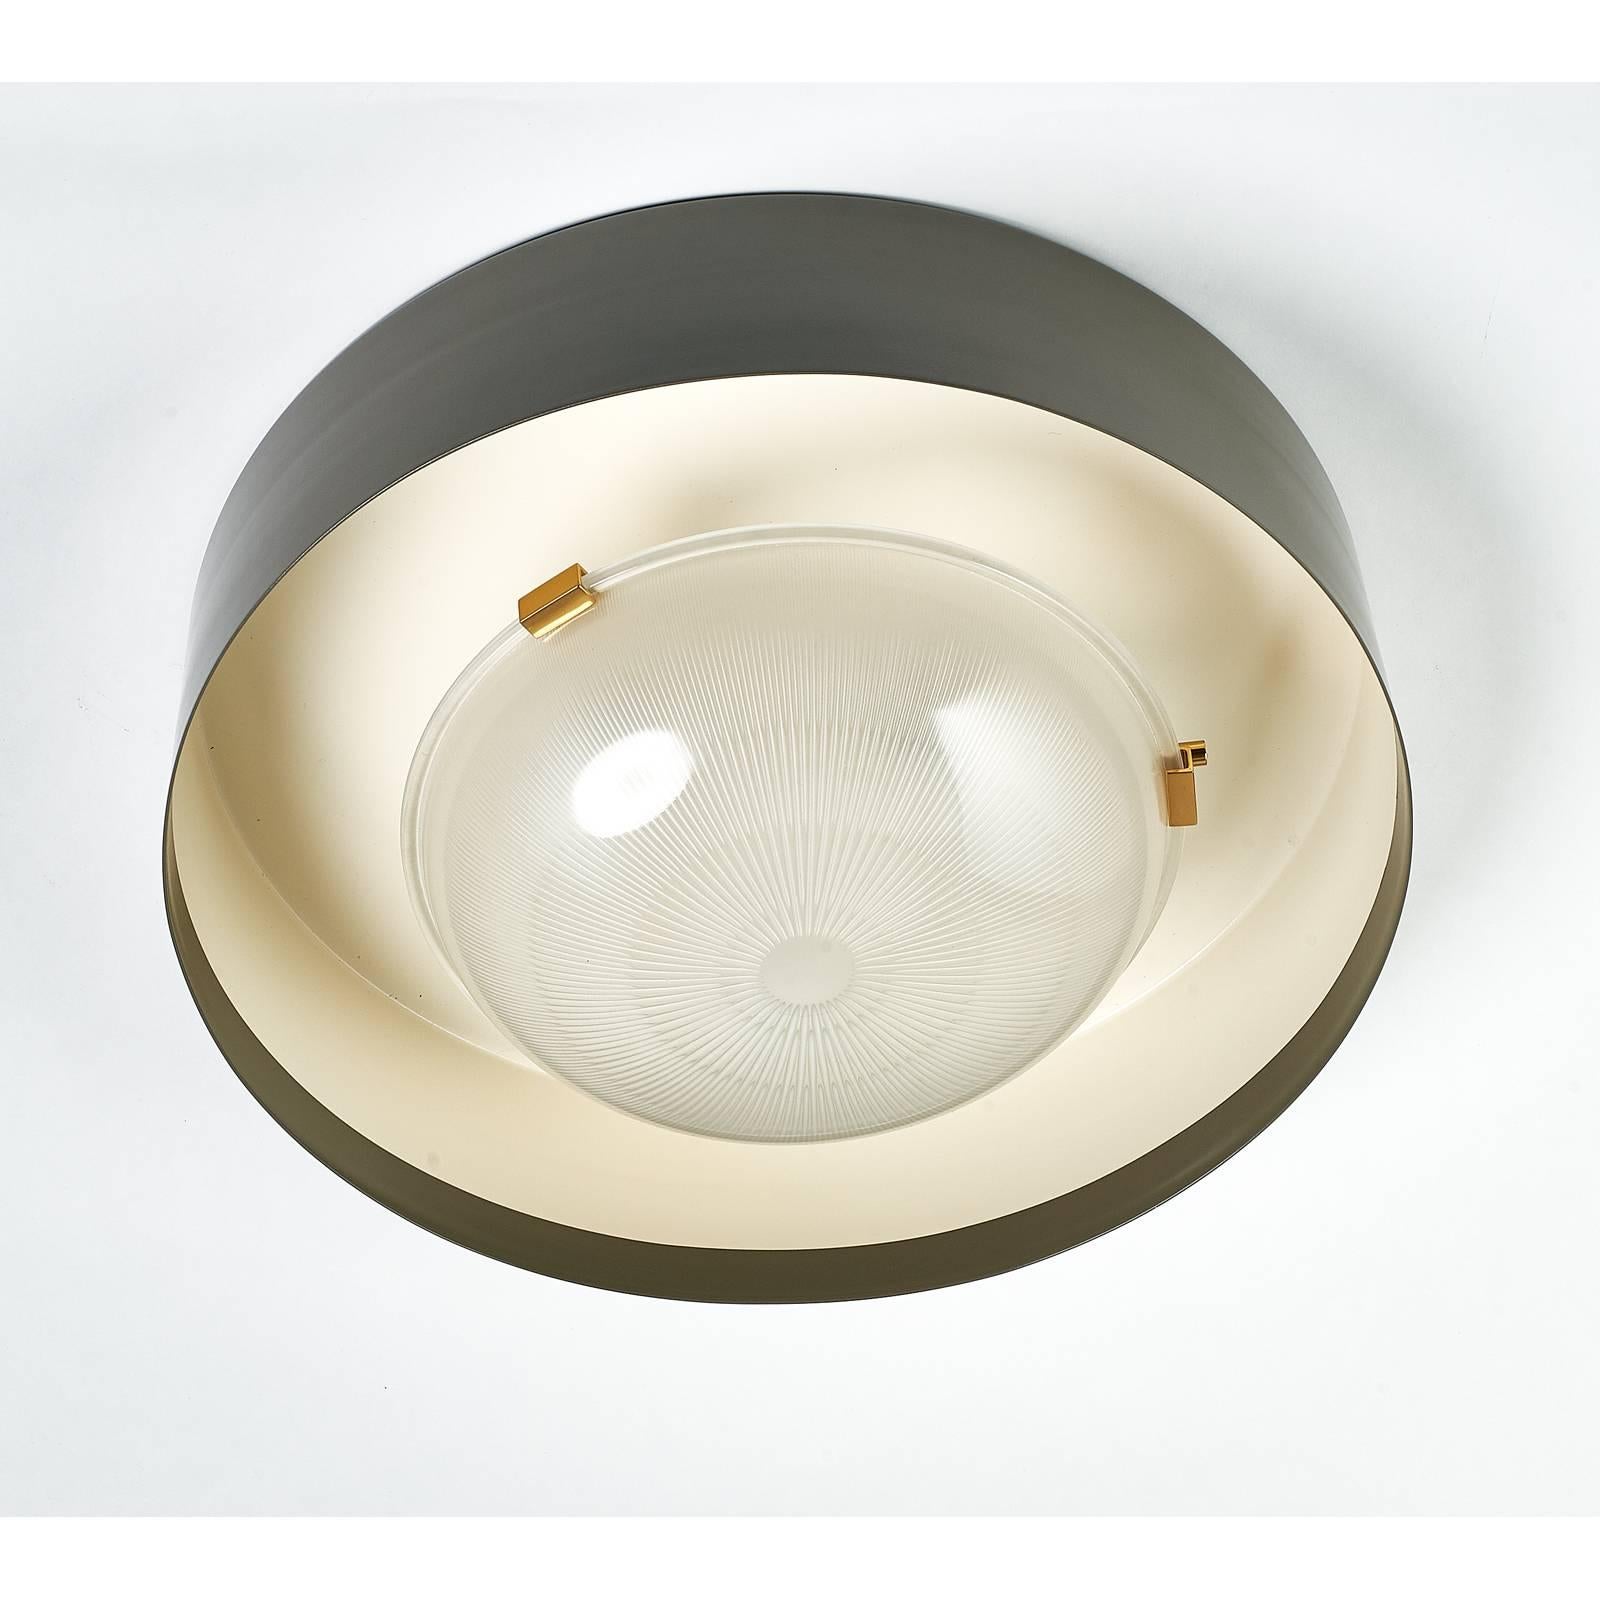 IGNAZIO GARDELLA FOR AZUCENA

Flush mount ceiling fixture designed by Ignazio Gardella for Azucena, early 1960's. 
A rarely seen model (LP5 Sestrière). 
Ribbed cast frosted glass with gray enameled metal shade, polished brass mounts 
Rewired for use